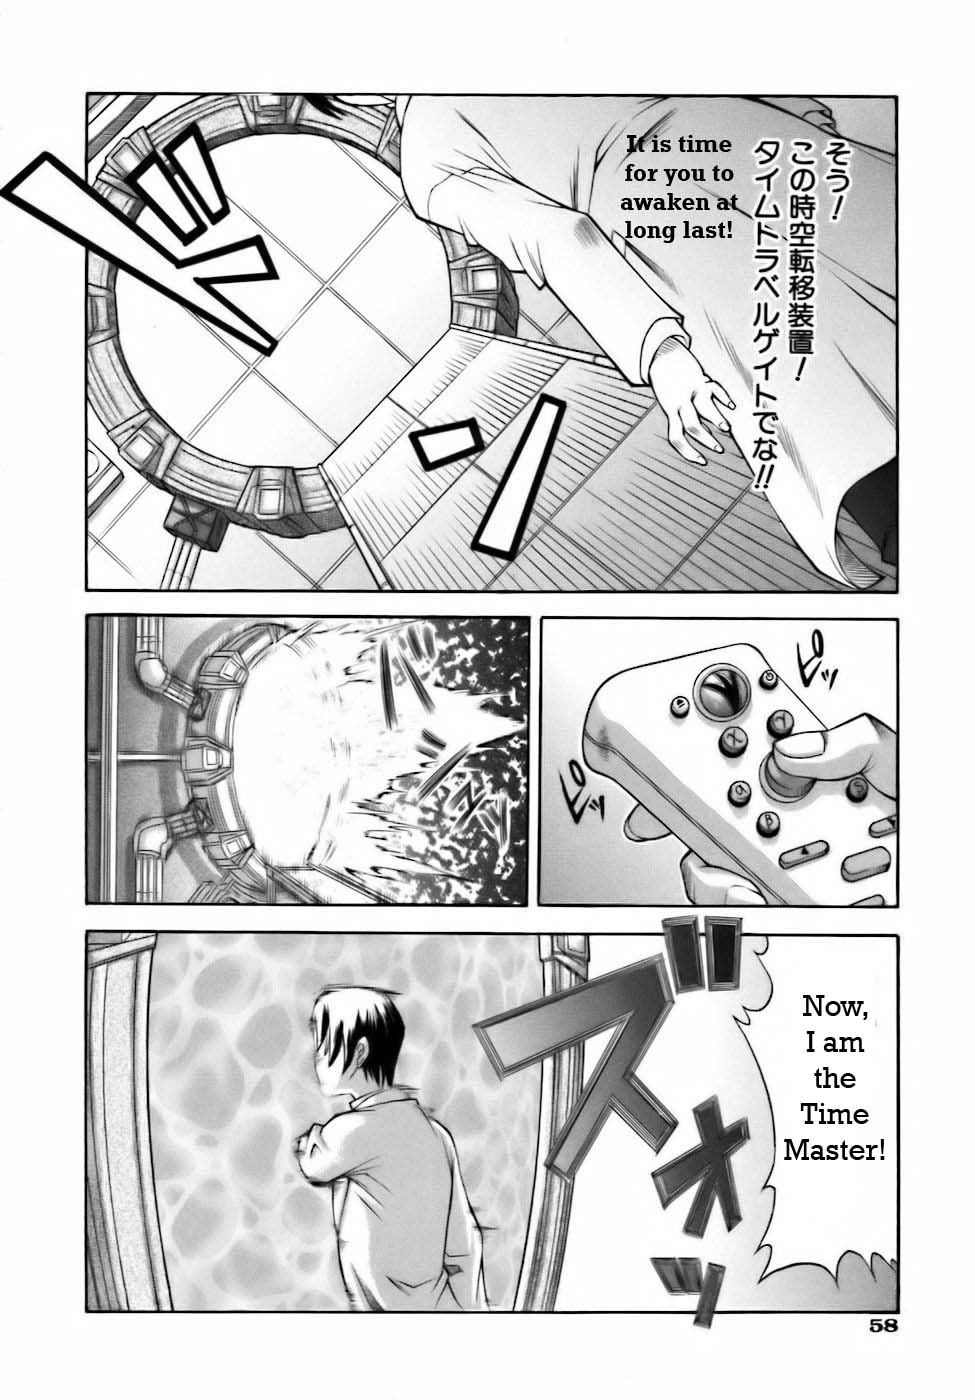 The Time Master [English] [Rewrite] [WhatVVB] page 8 full